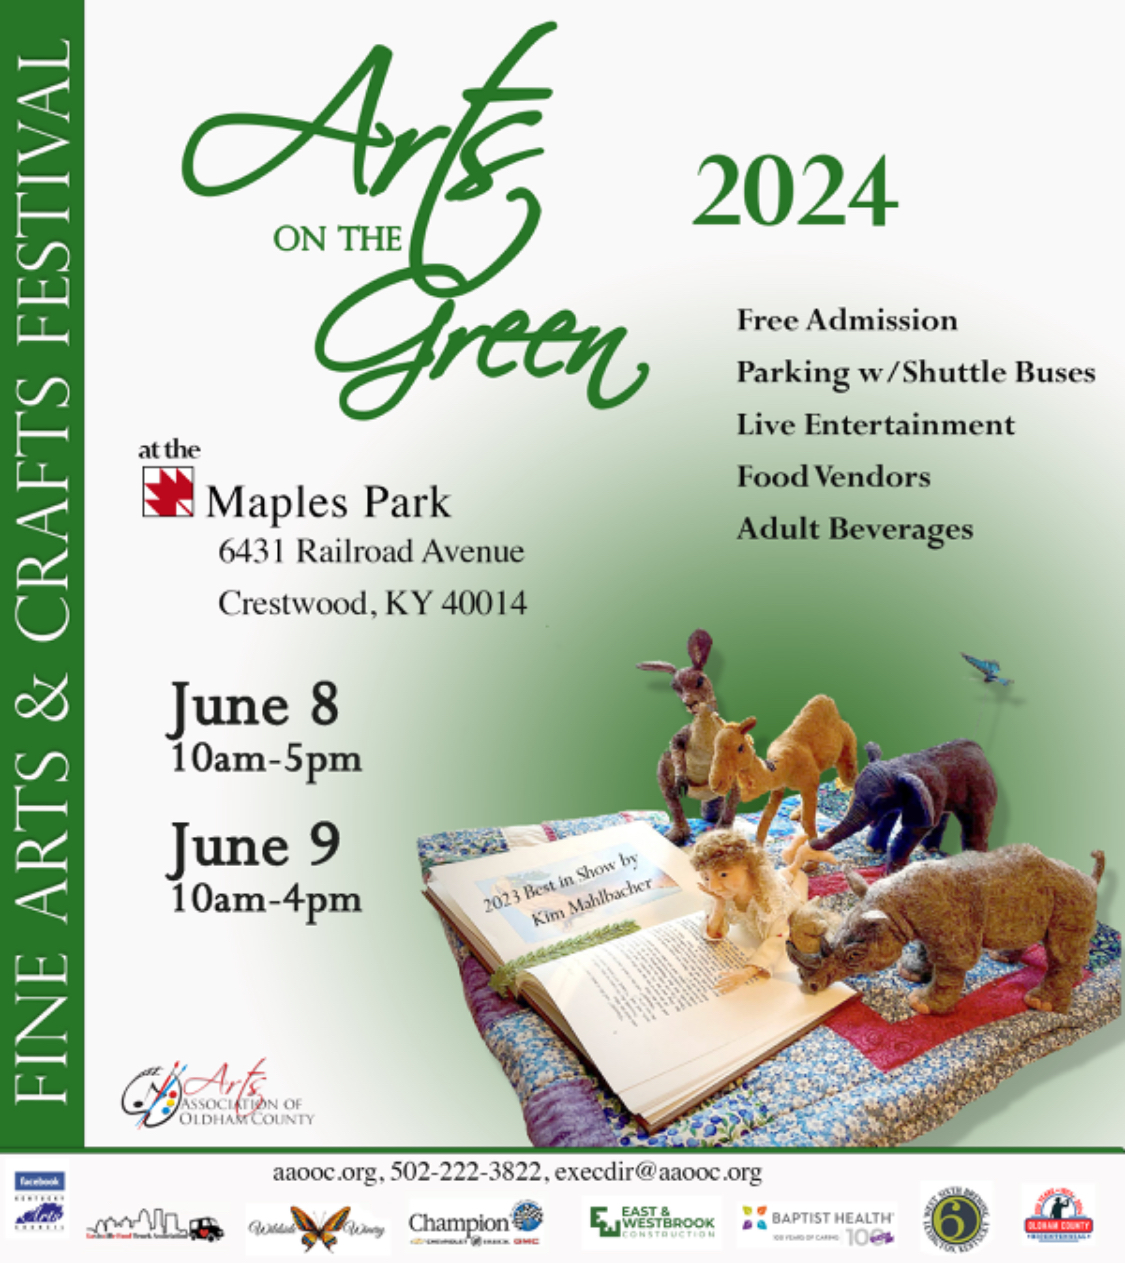 Logo for Arts on the Green at the Maples Park 2024